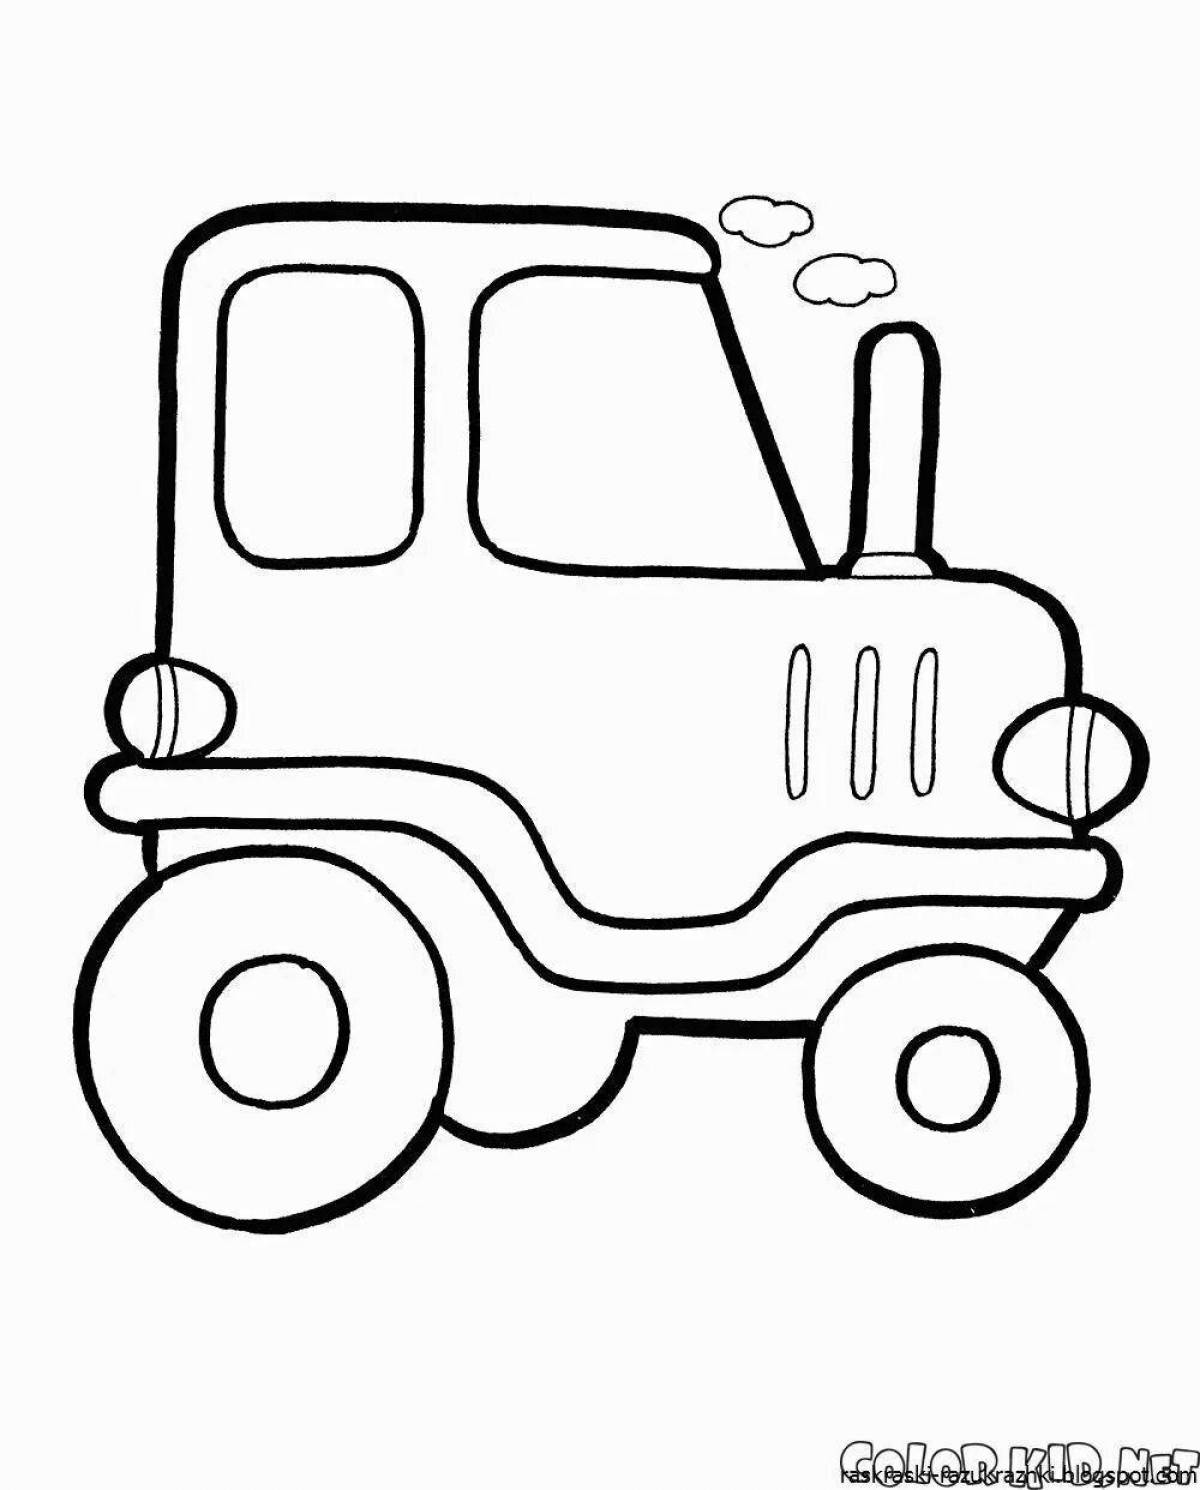 Coloring pages with colorful cars for 2 year olds